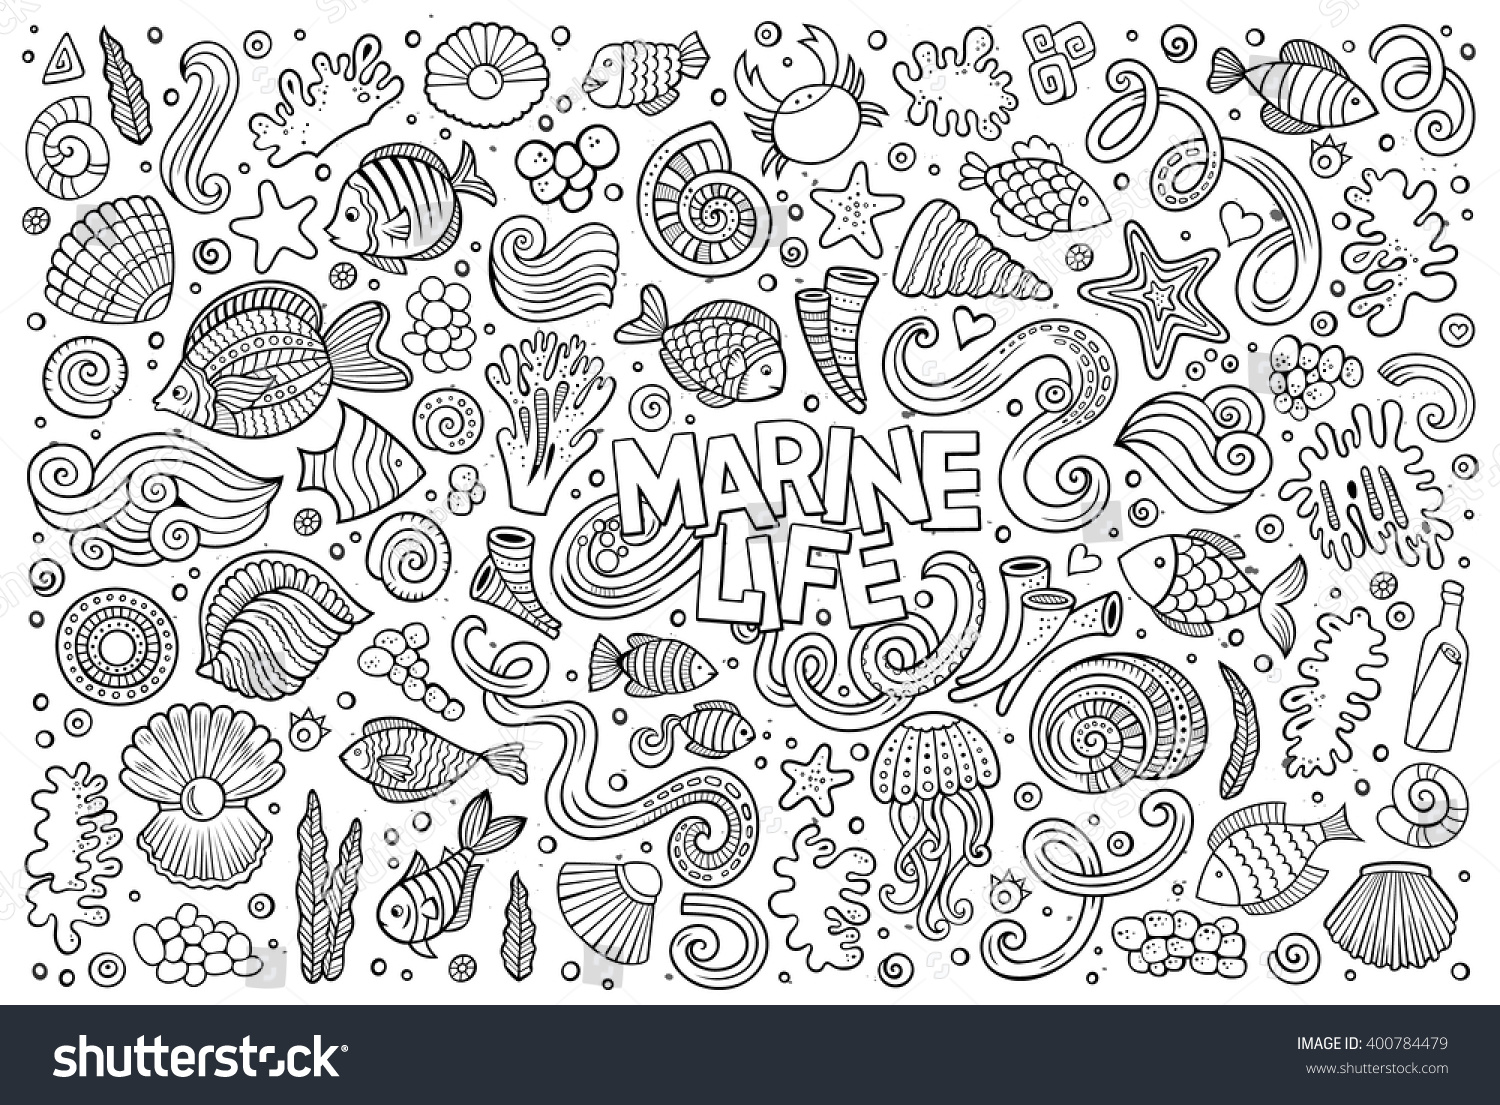 Line Art Vector Hand Drawn Doodle Stock Vector (Royalty Free) 400784479 ...